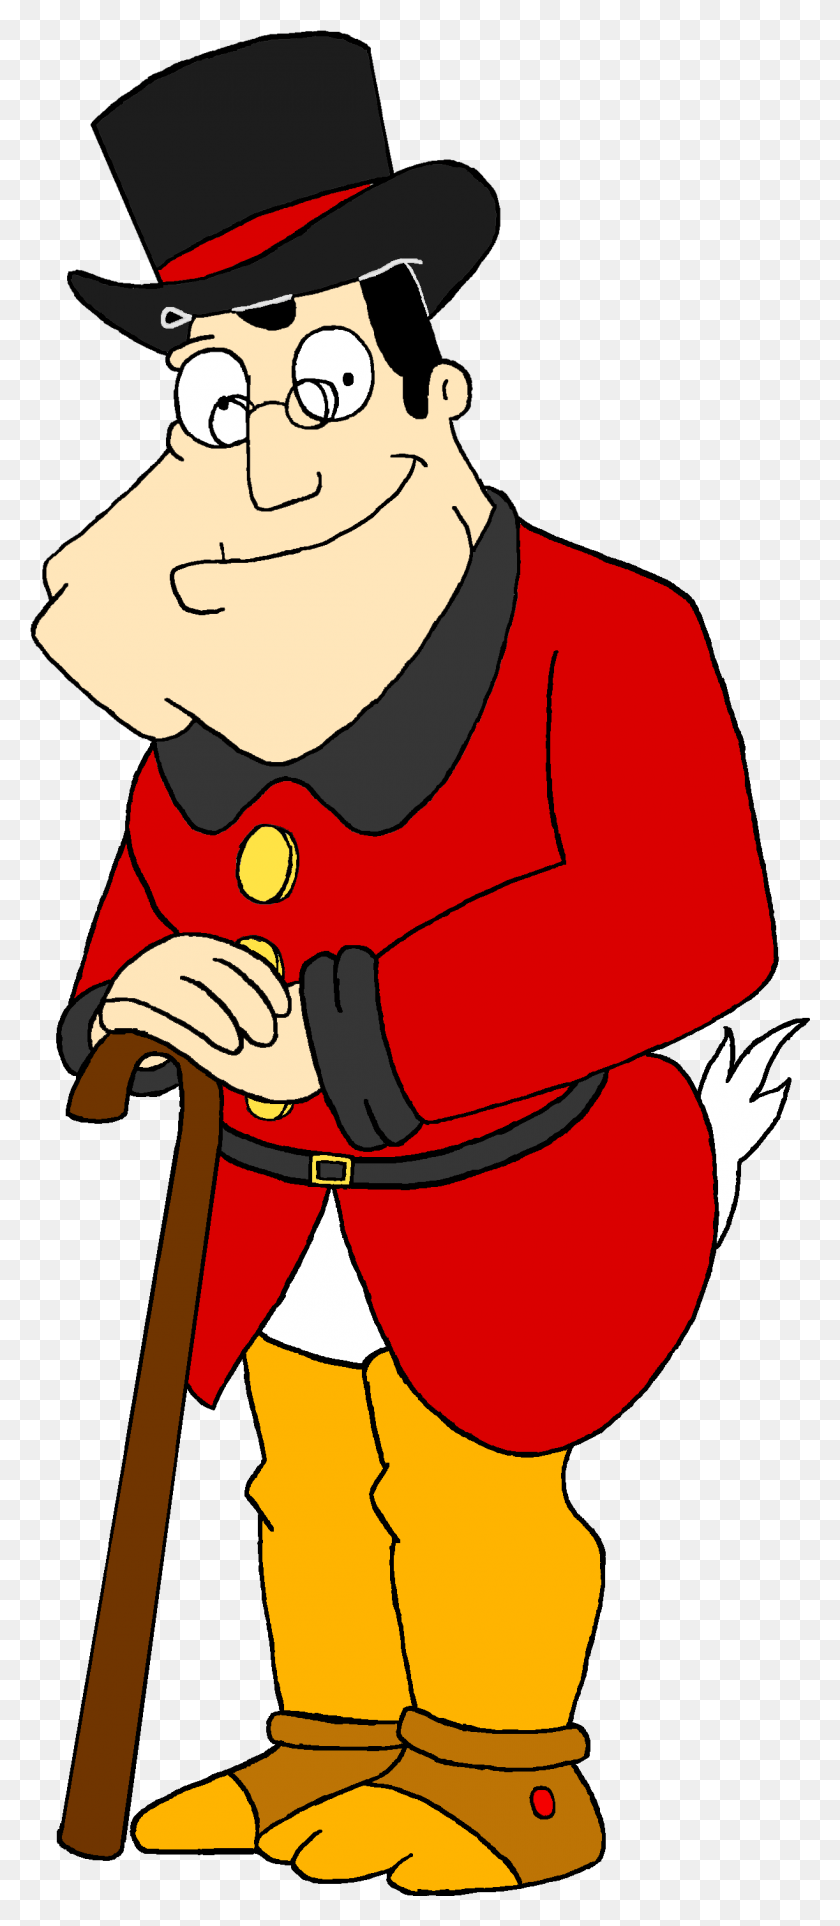 1222x2924 Stan Smith Como Scrooge Mcduck, Persona, Humano, Accesorios Hd Png